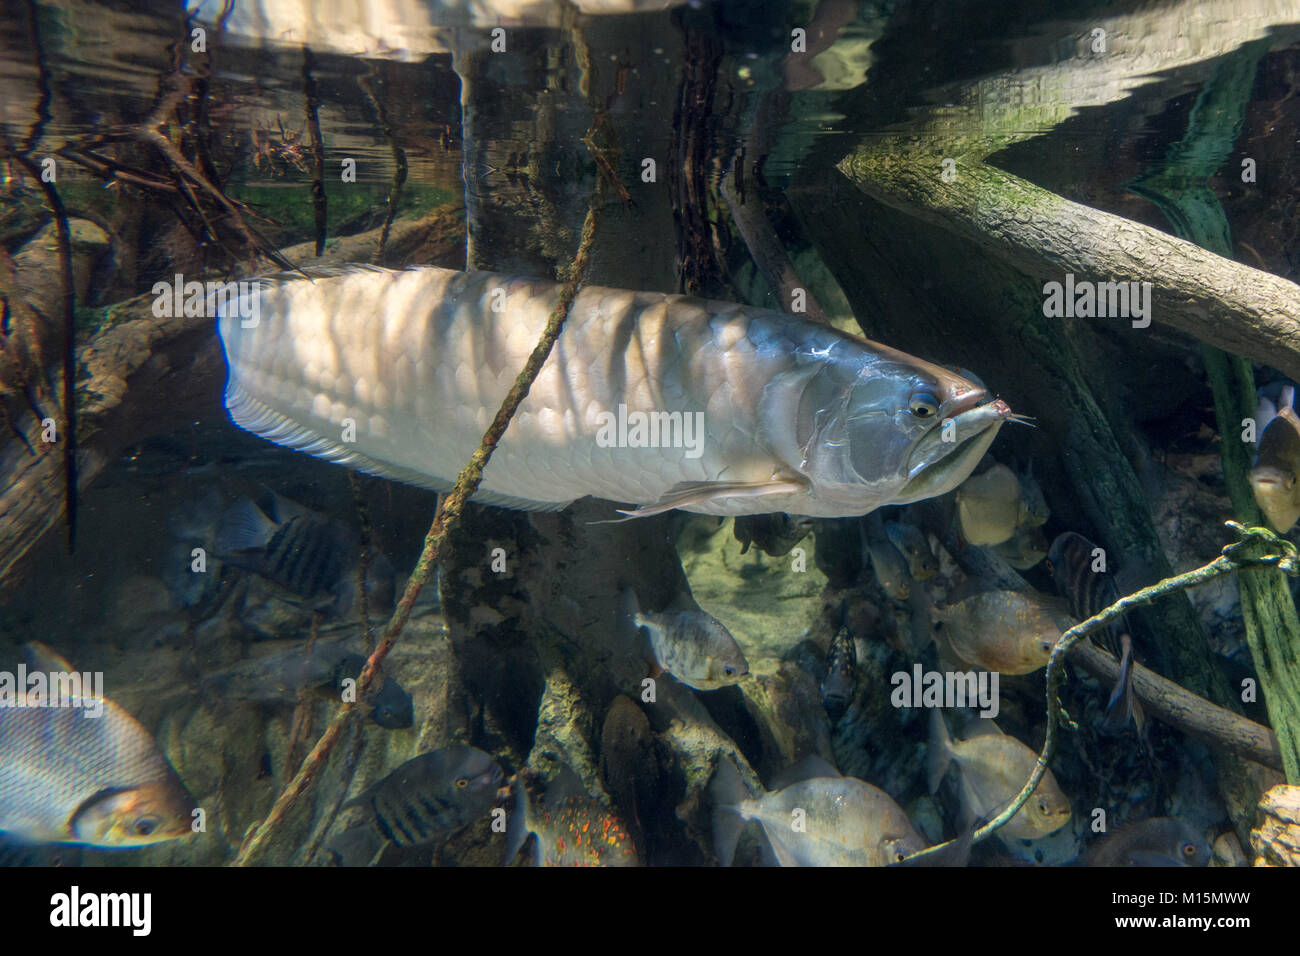 A silver arowana on display in the National Aquarium, Baltimore, Maryland, United States. Stock Photo